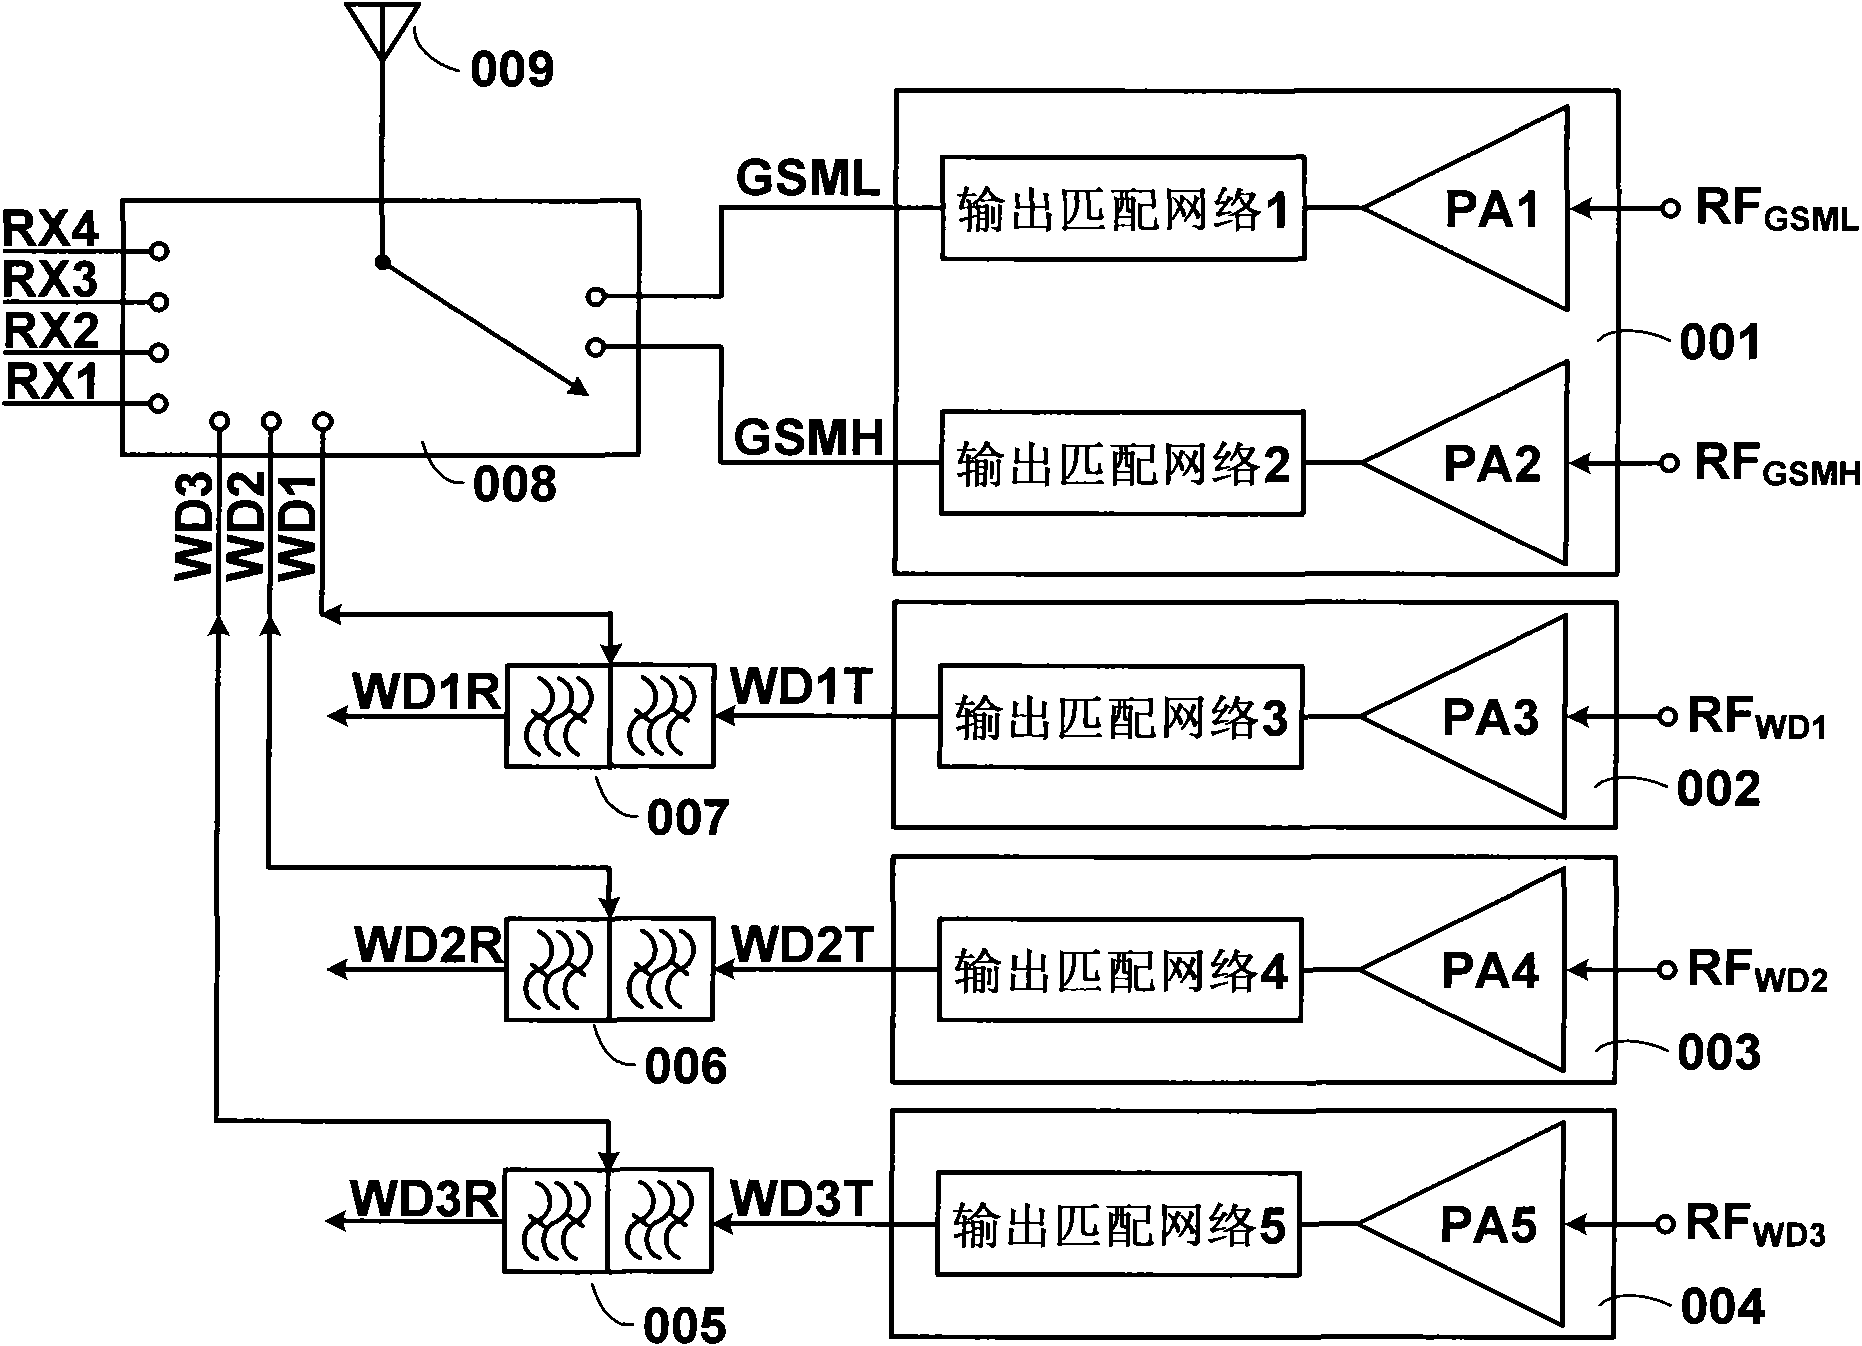 Configurable multimode radio-frequency front end module and mobile terminal having same